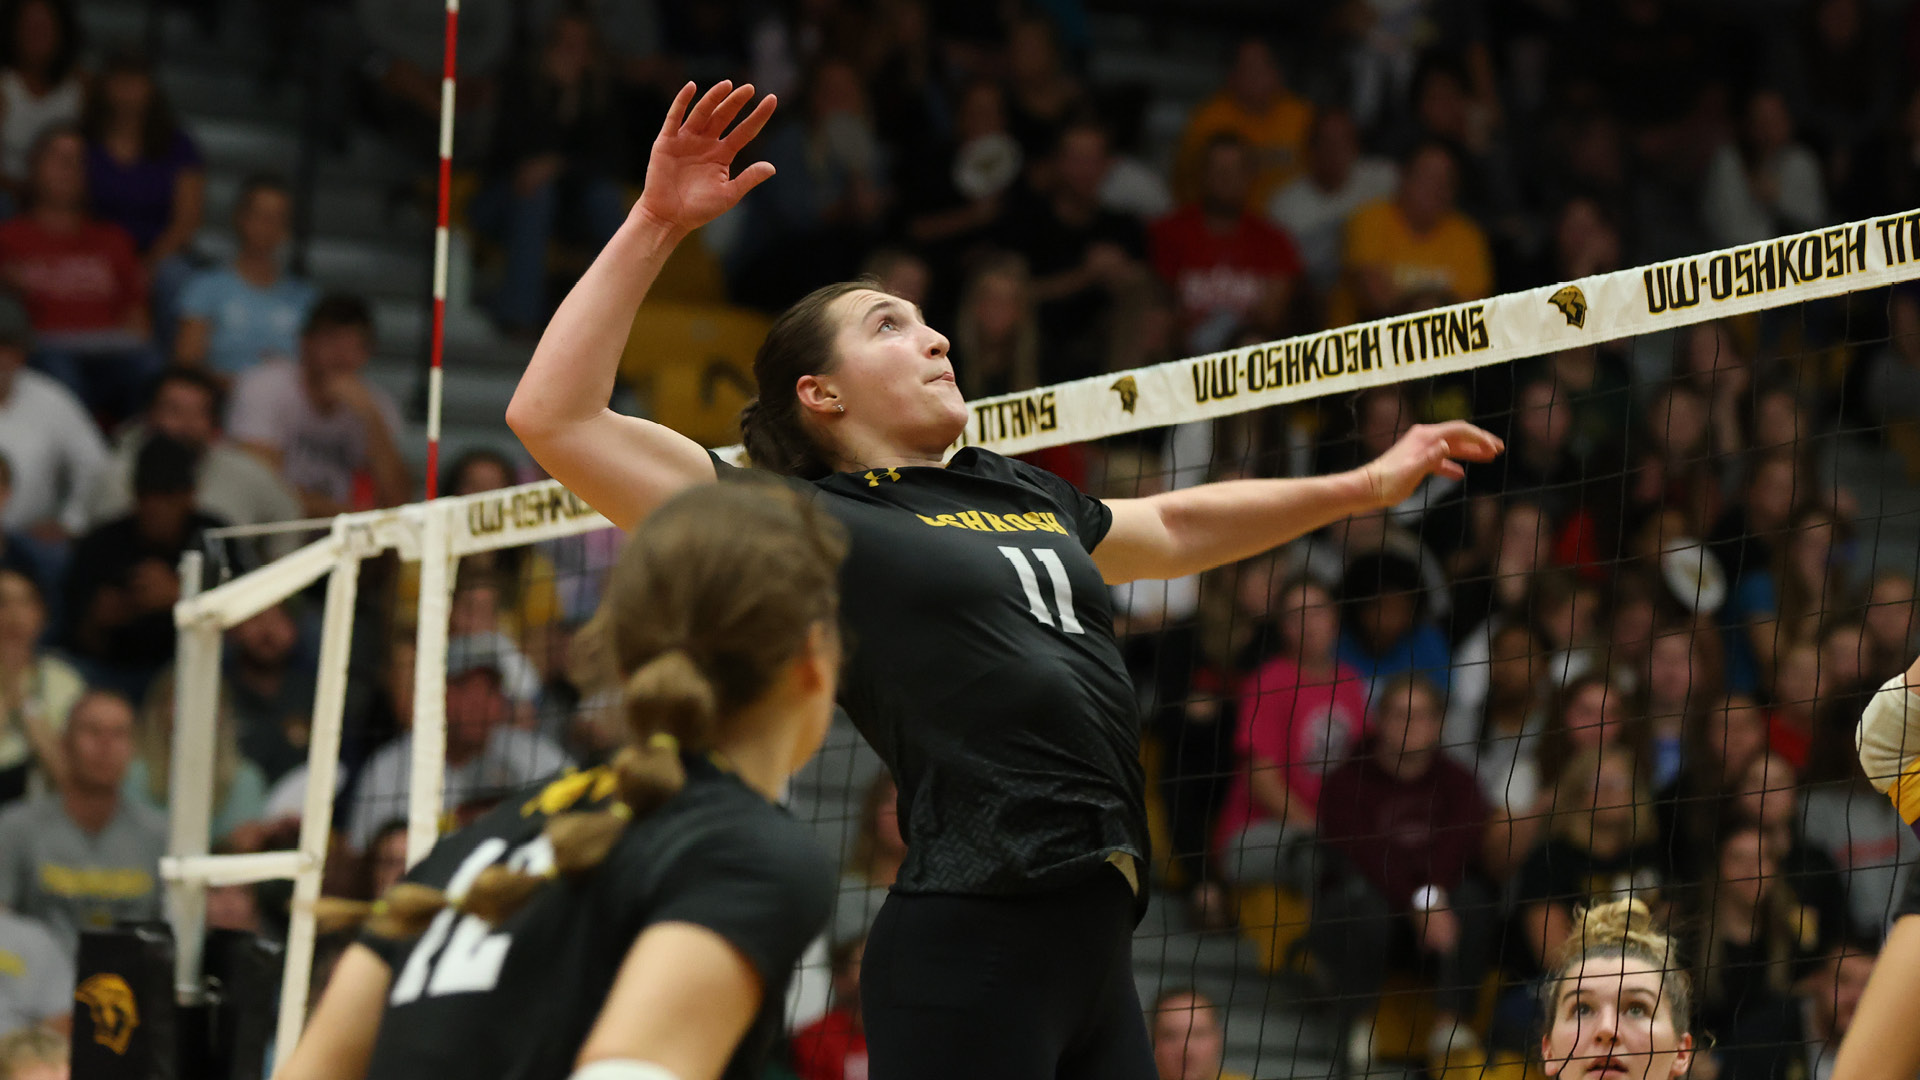 Riley Kindt led the Titans with 12 kills in the win over UW-Stevens Point on Tuesday